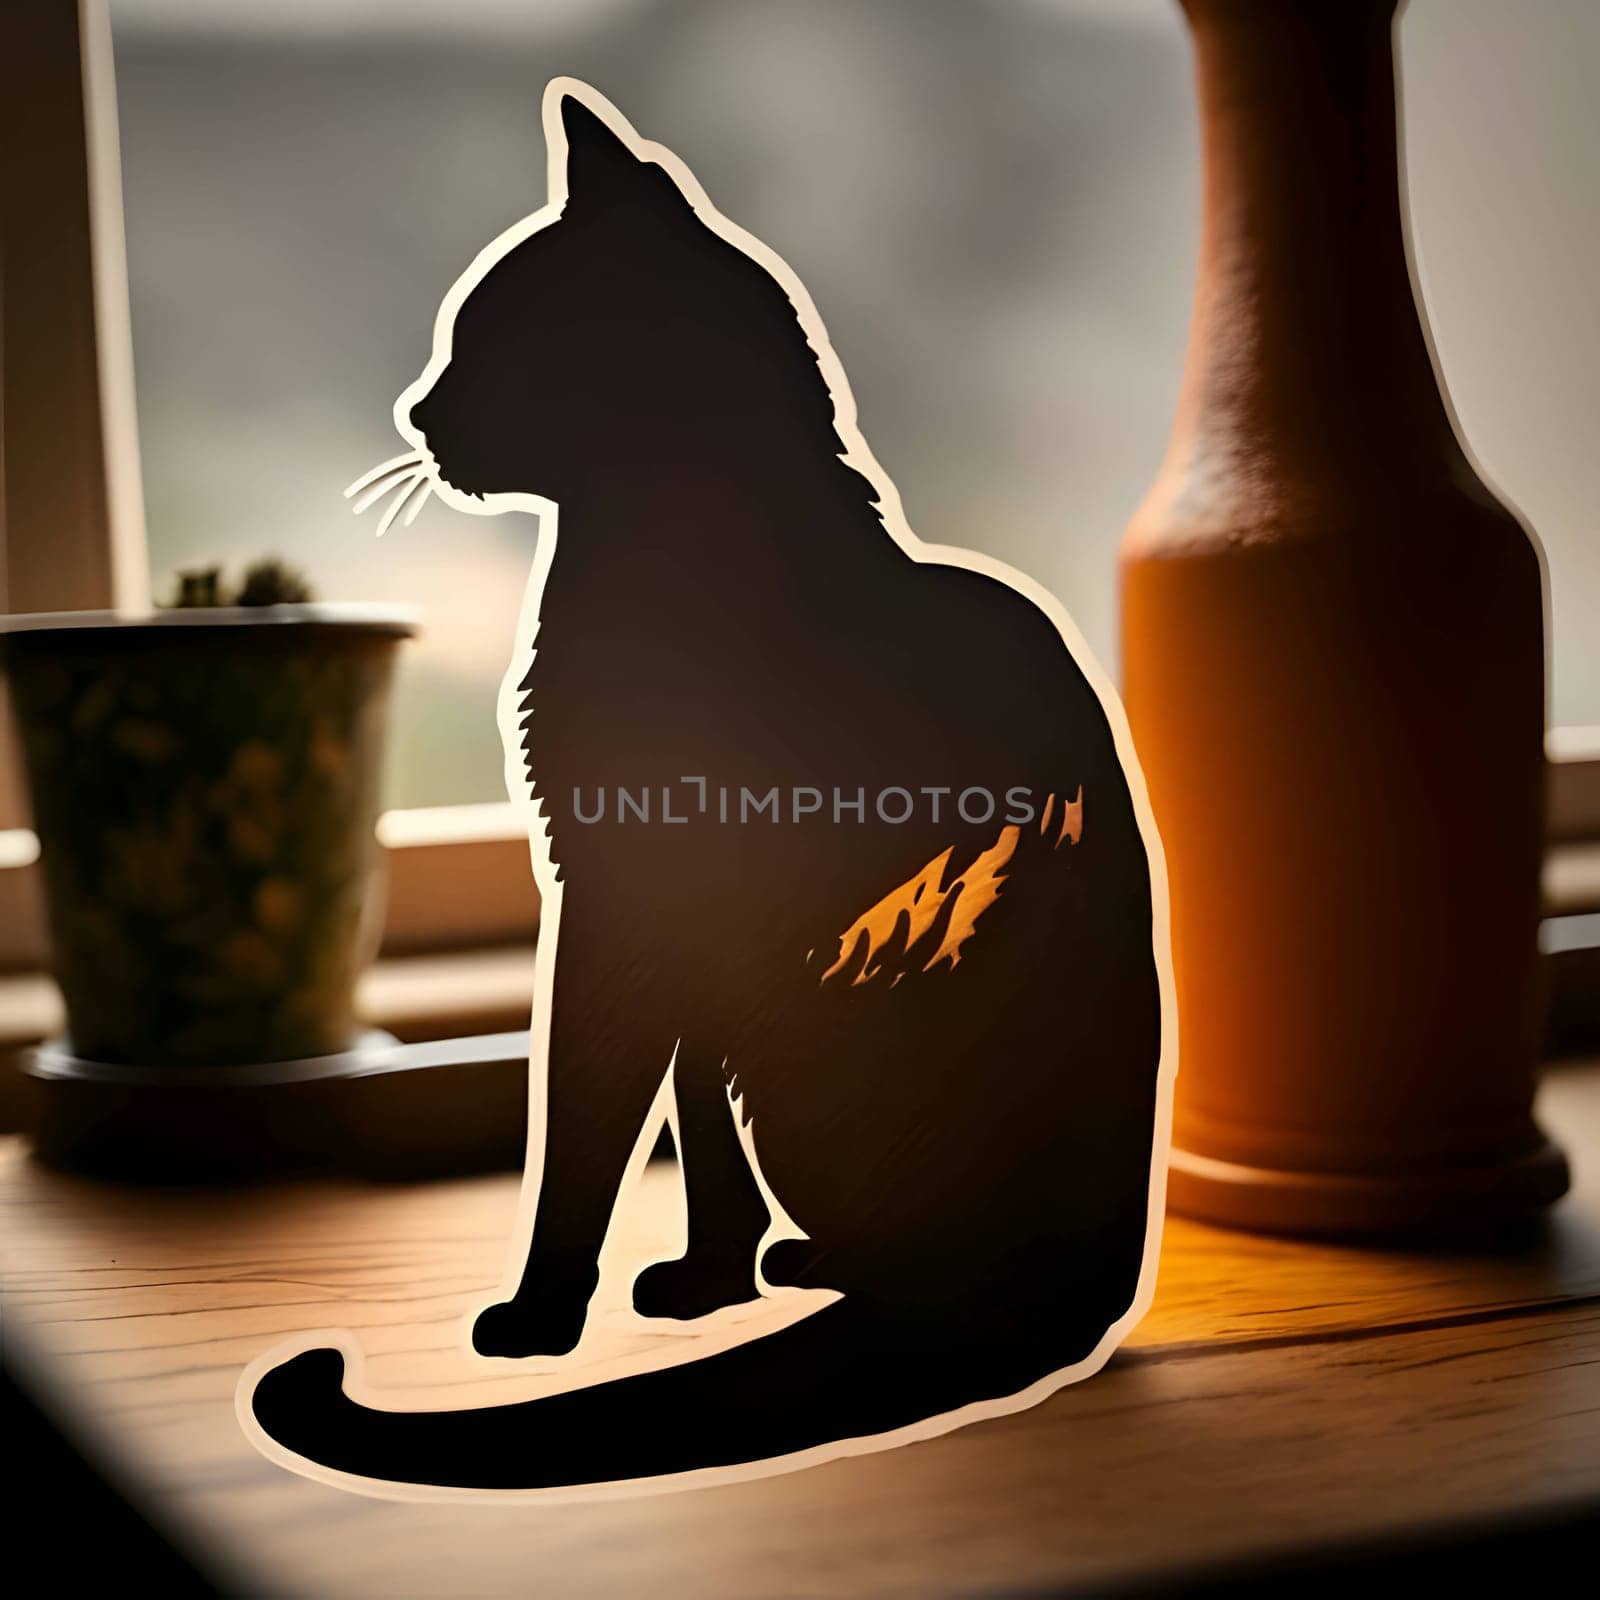 Vector illustration of a cat in black silhouette against a desk in background, capturing graceful forms.